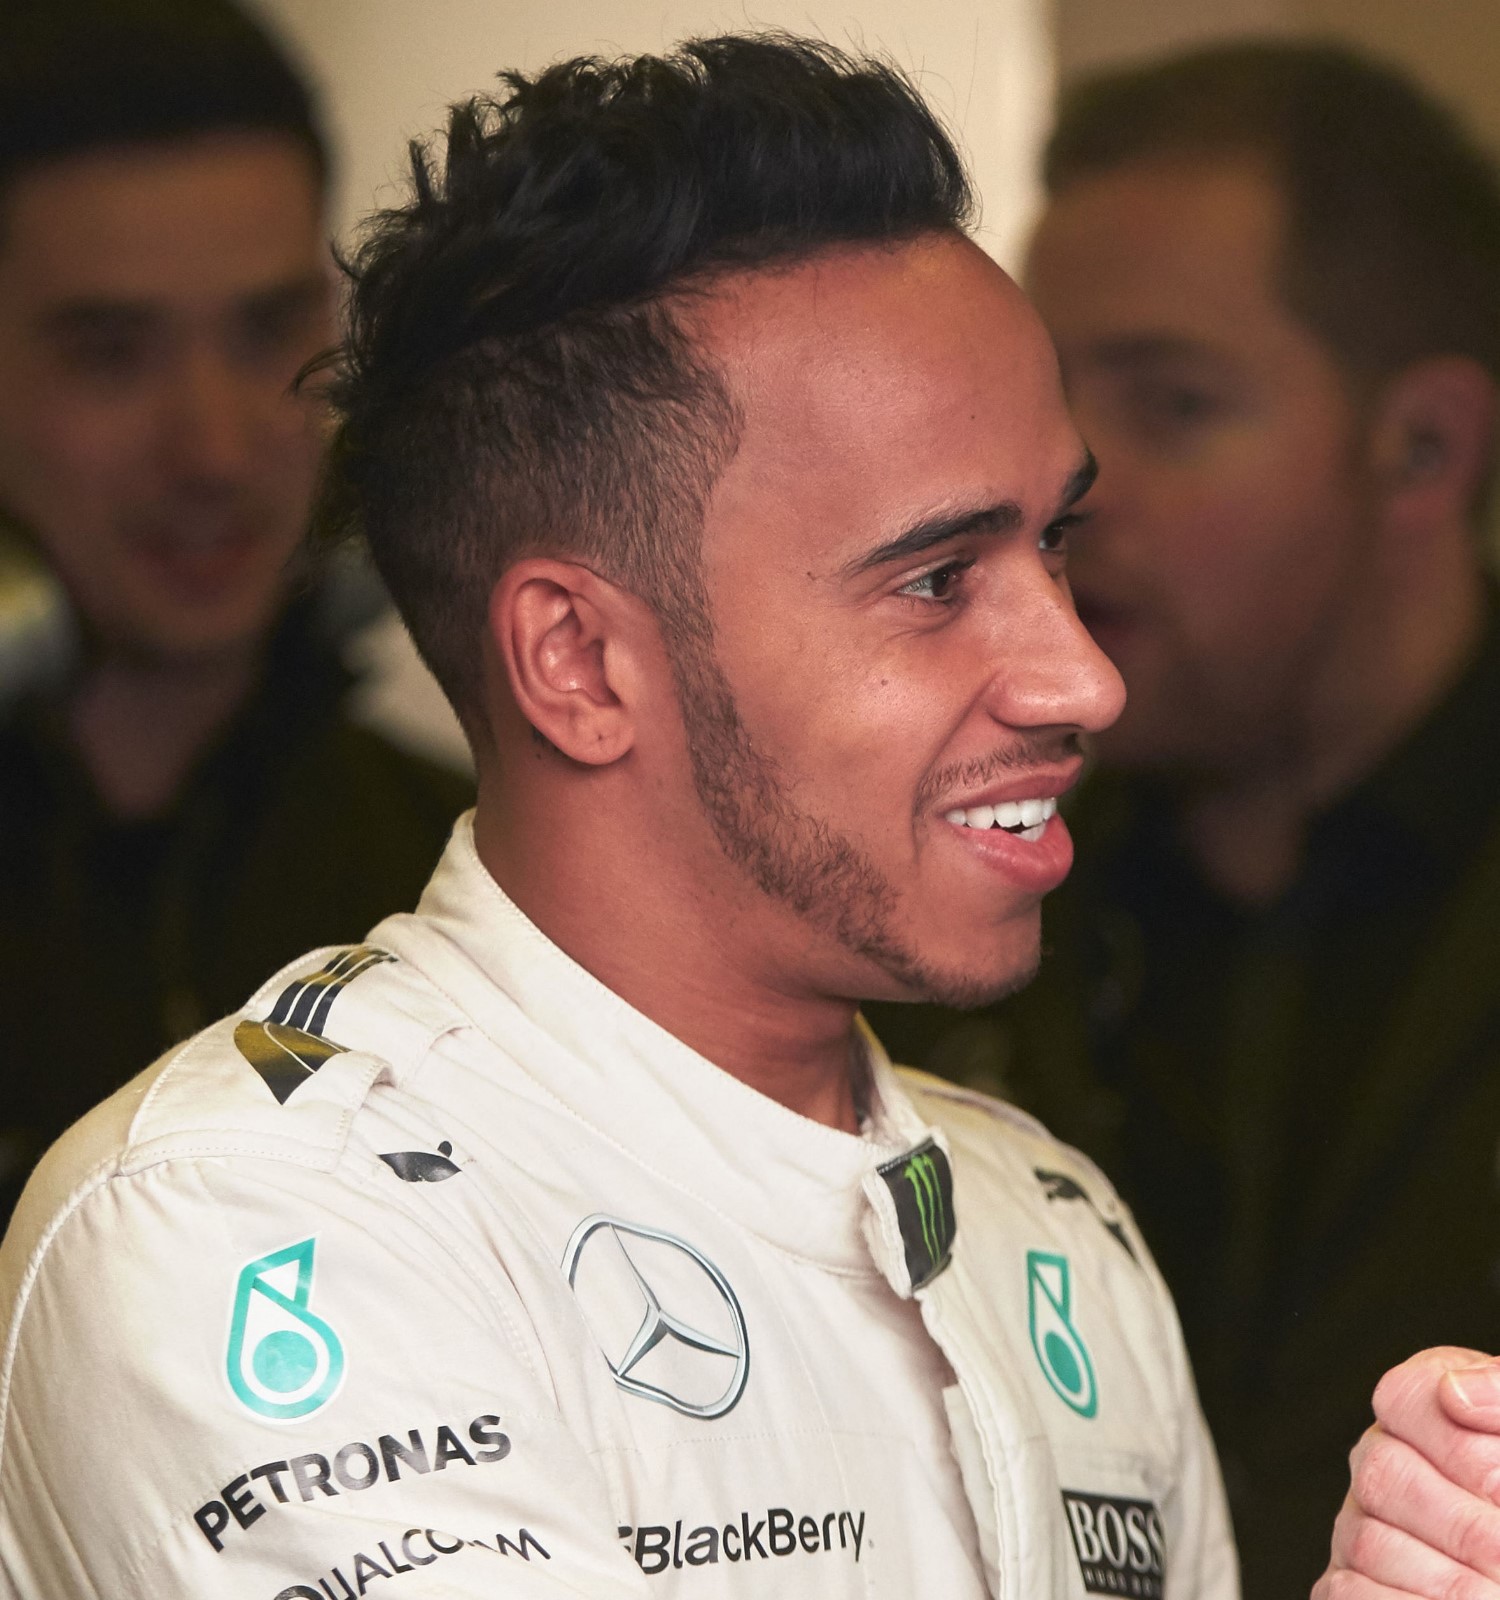 Knowing the 2015 F1 title is his, Hamilton is partying hard